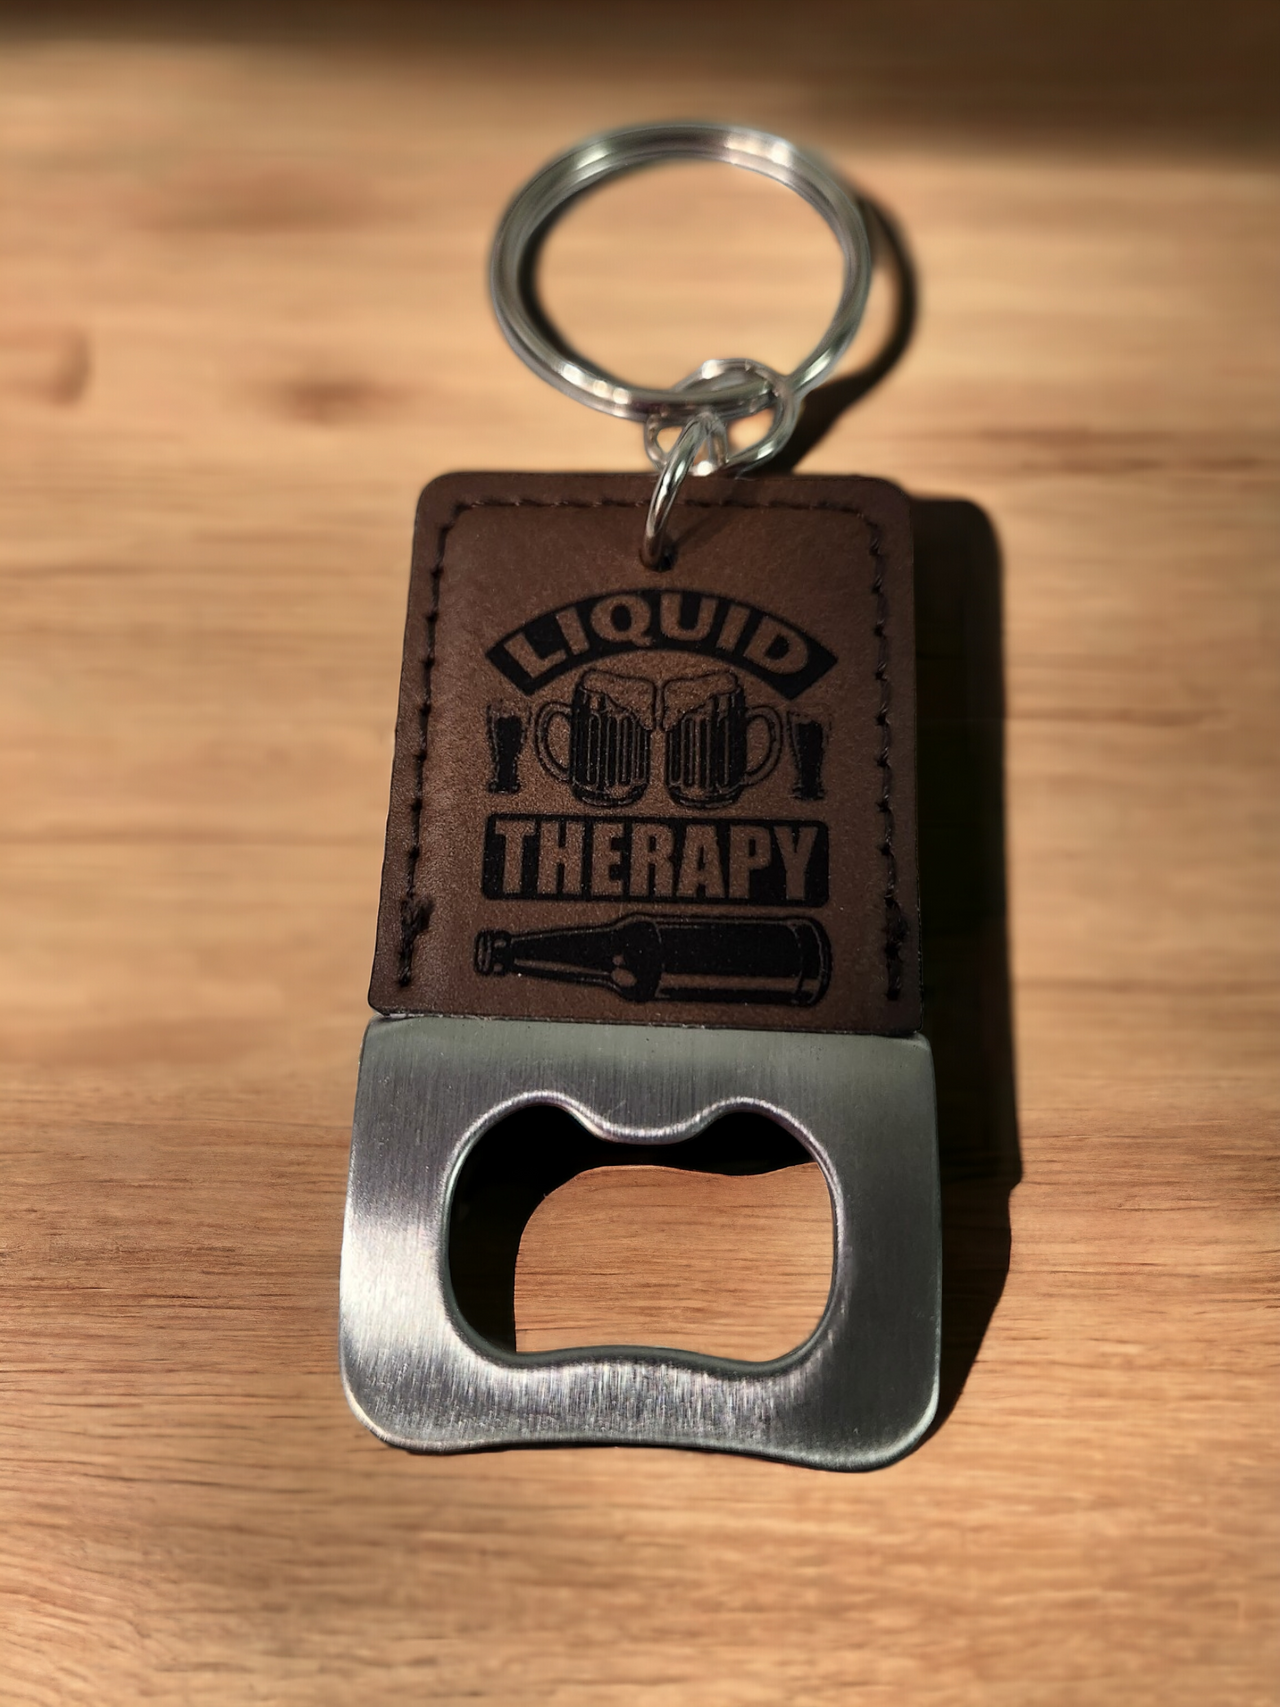 Liquid Therapy Bottle Opener Keychain - Engraved Leatherette Design